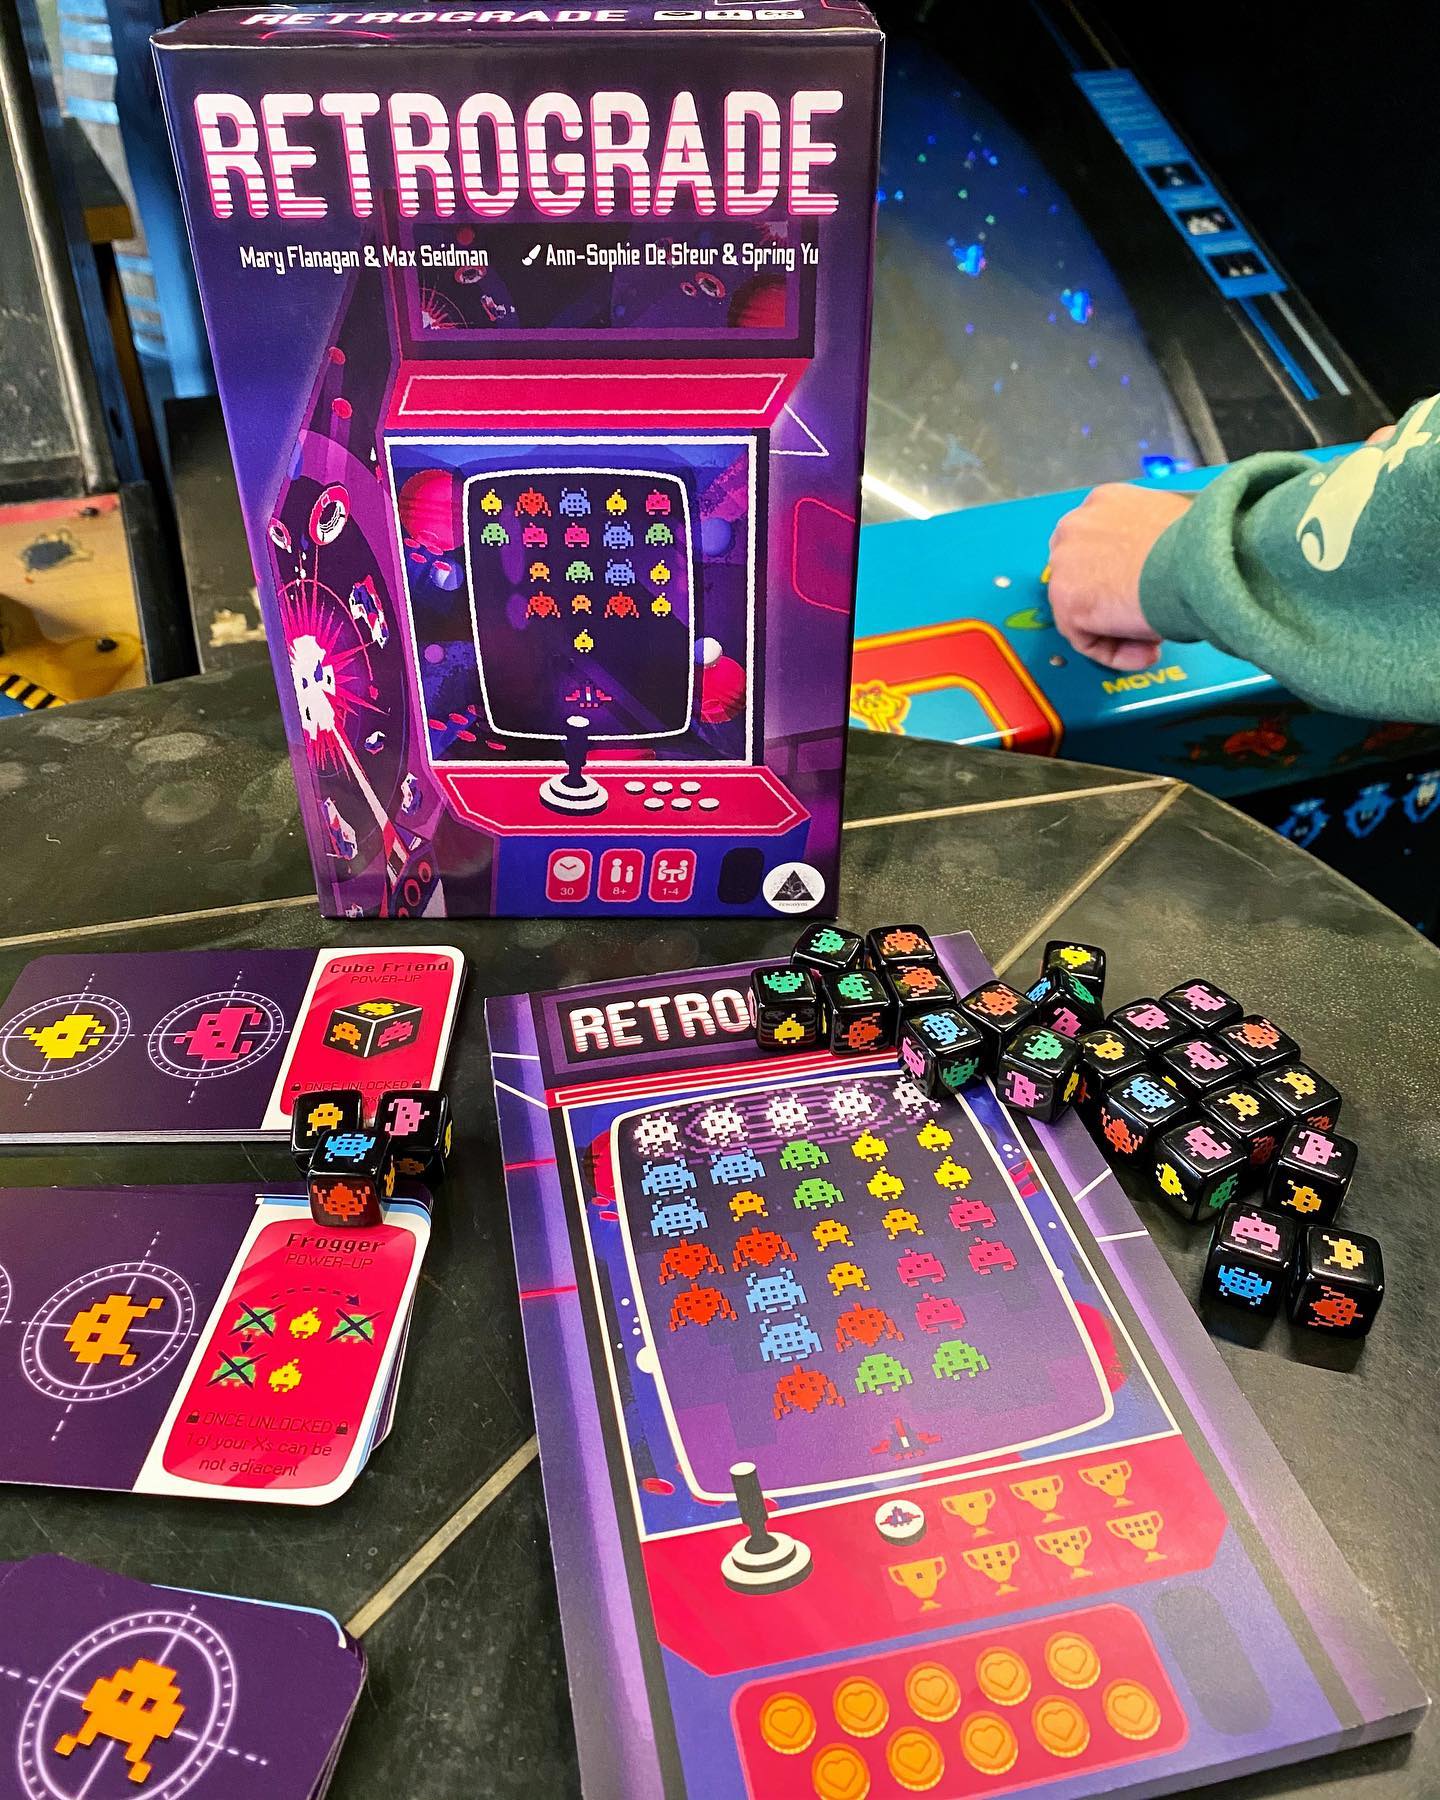 Retrograde has finally landed! Our totally radical roll and write is like Space Invaders with a pen and paper. If you like old school arcades and the sweet satisfaction of rolling lots of dice, check us out on Kickstarter! Link in bio 👾💥

#boardgames #boardgaming #tabletopgames #bgg #gamenight #indieboardgames #kickstarter #kickstartergames #resonym #boardgamesofinstagram #dice #retro #retroaesthetic #retrogaming #arcade